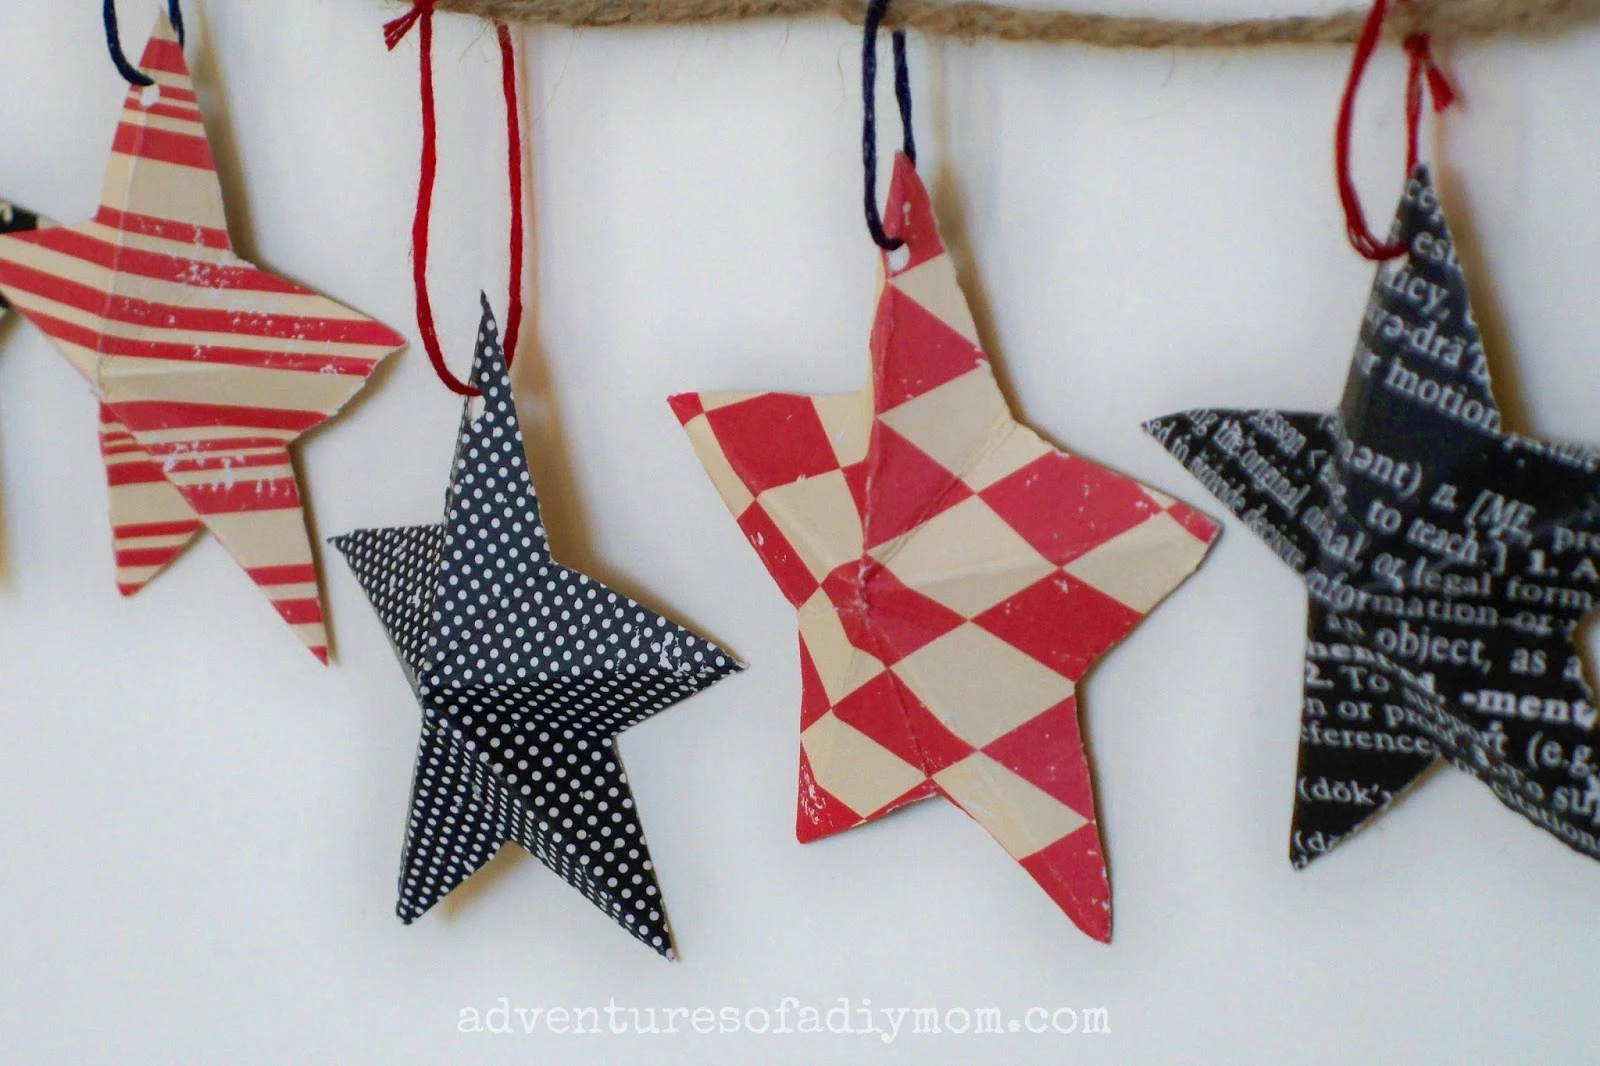 How to Make 3-D Paper Stars